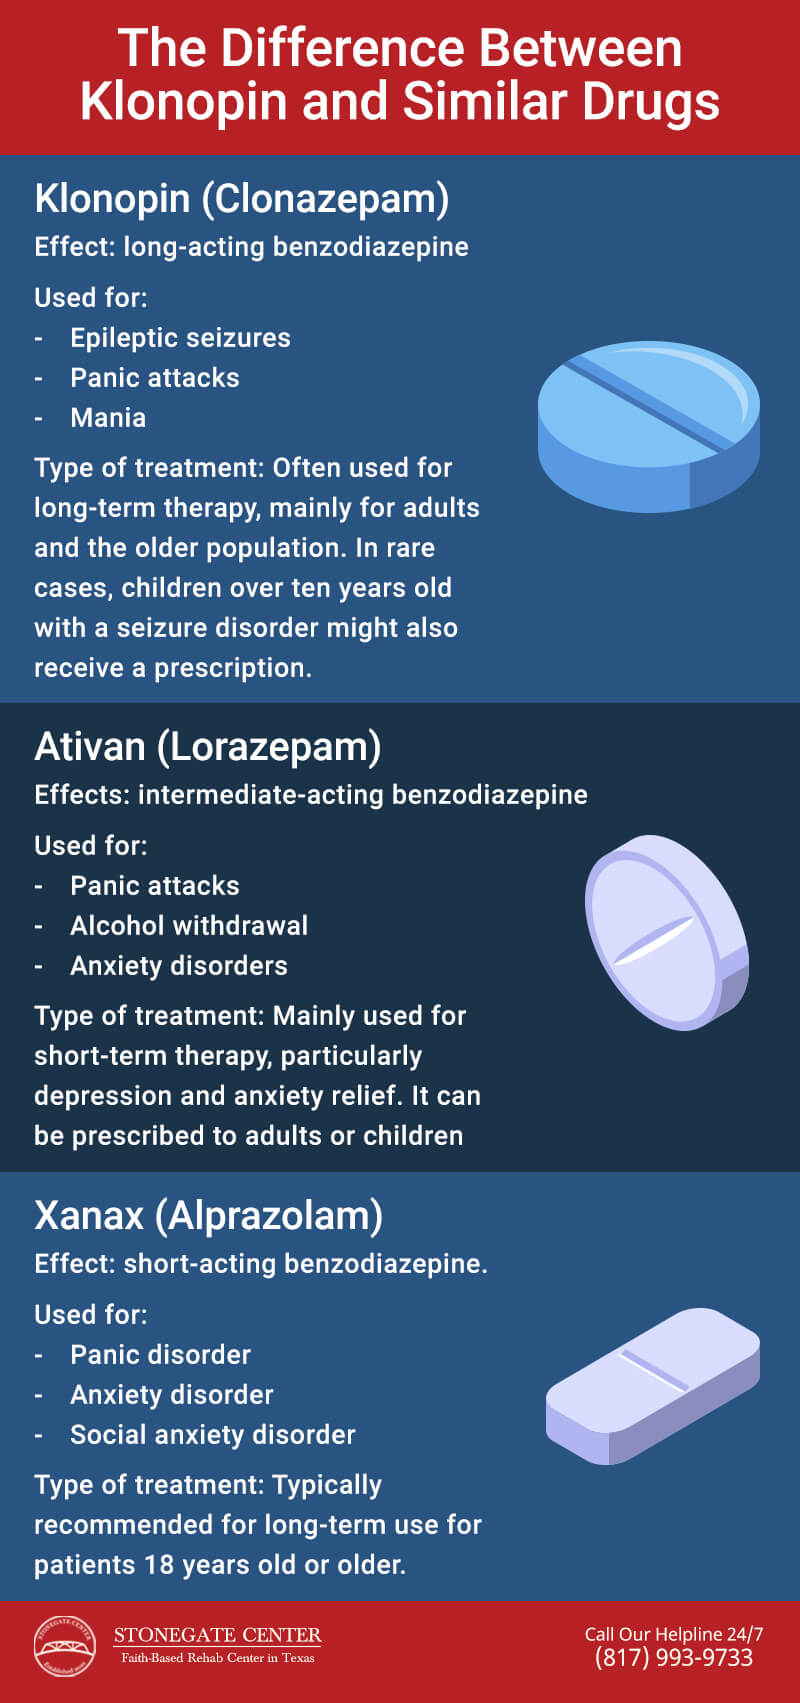 Stonegate Center Blog - Is Klonopin More Dangerous Than Cocaine? - Difference Between Klonopin and Similar Drugs Infographics